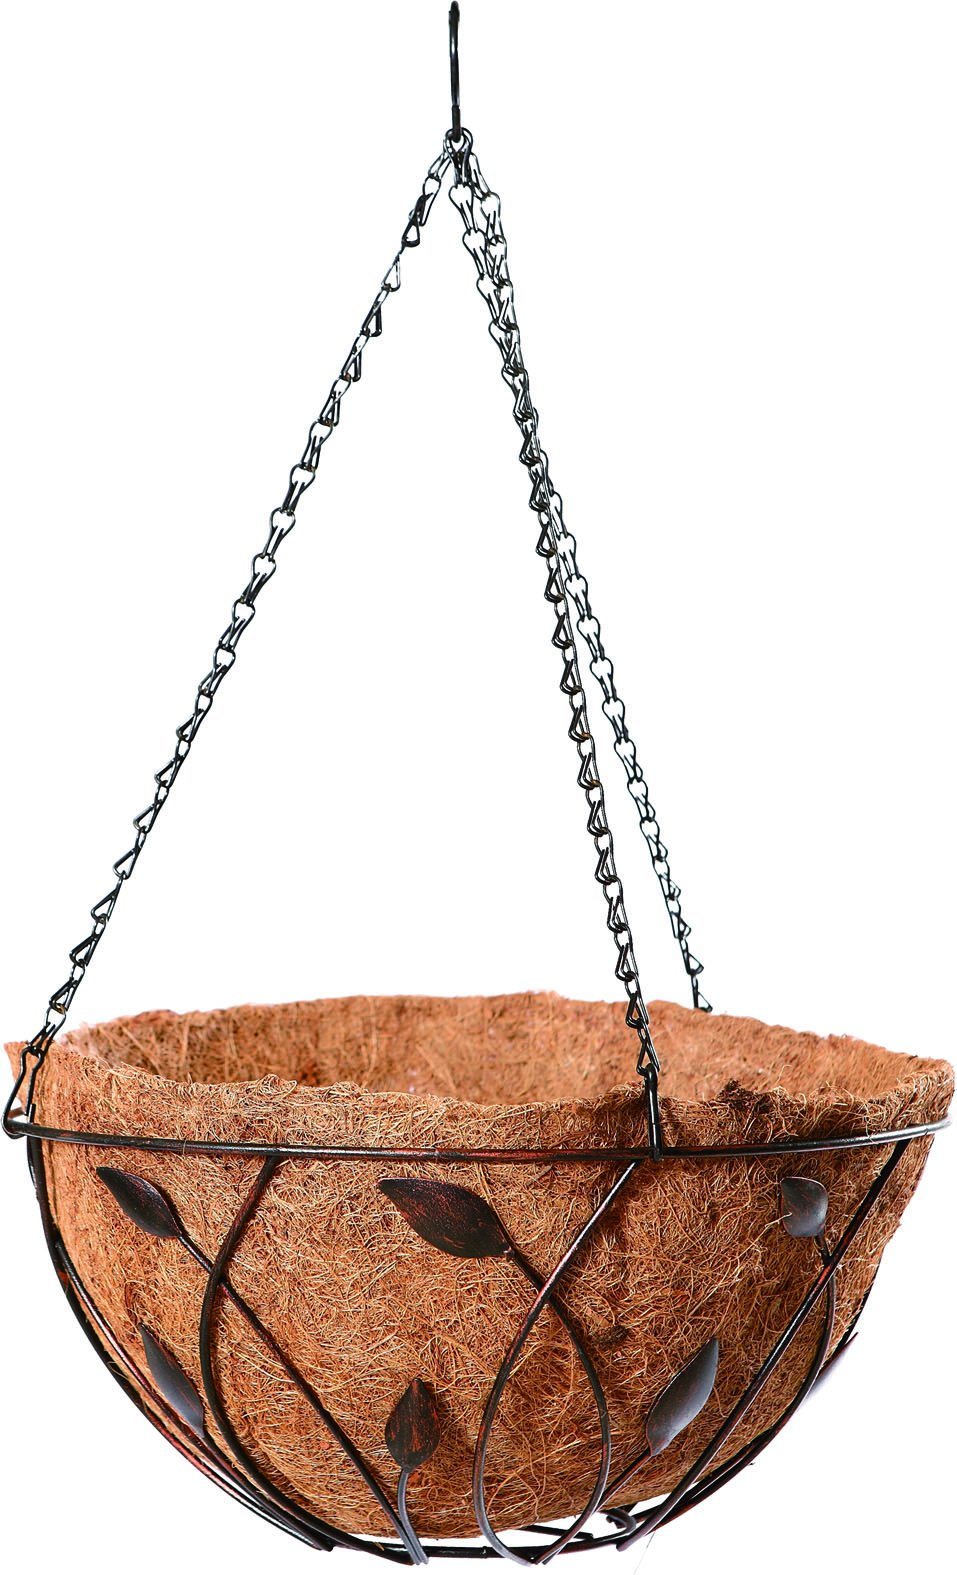 New Leaves-Shaped Garden Metal Hanging Basket with Chain and Coco Liner (2 sizes)